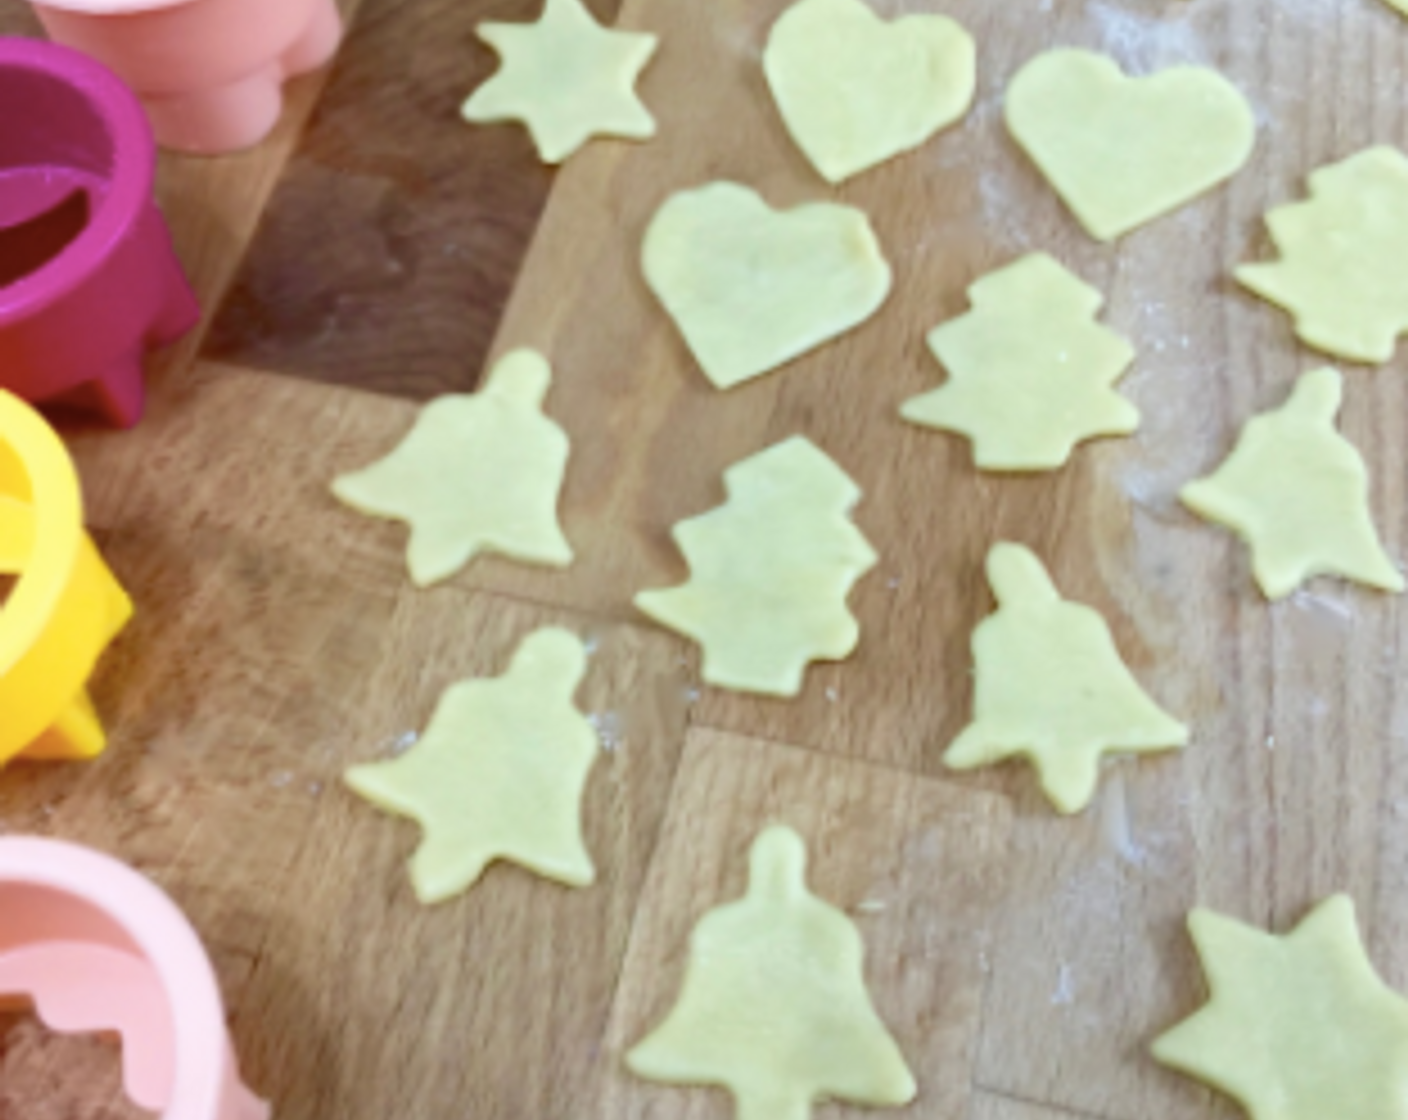 step 22 Then cut out another 24 smaller decorative stars or other fancy shapes using a smaller cookie cutter to fit as lids on the pies.